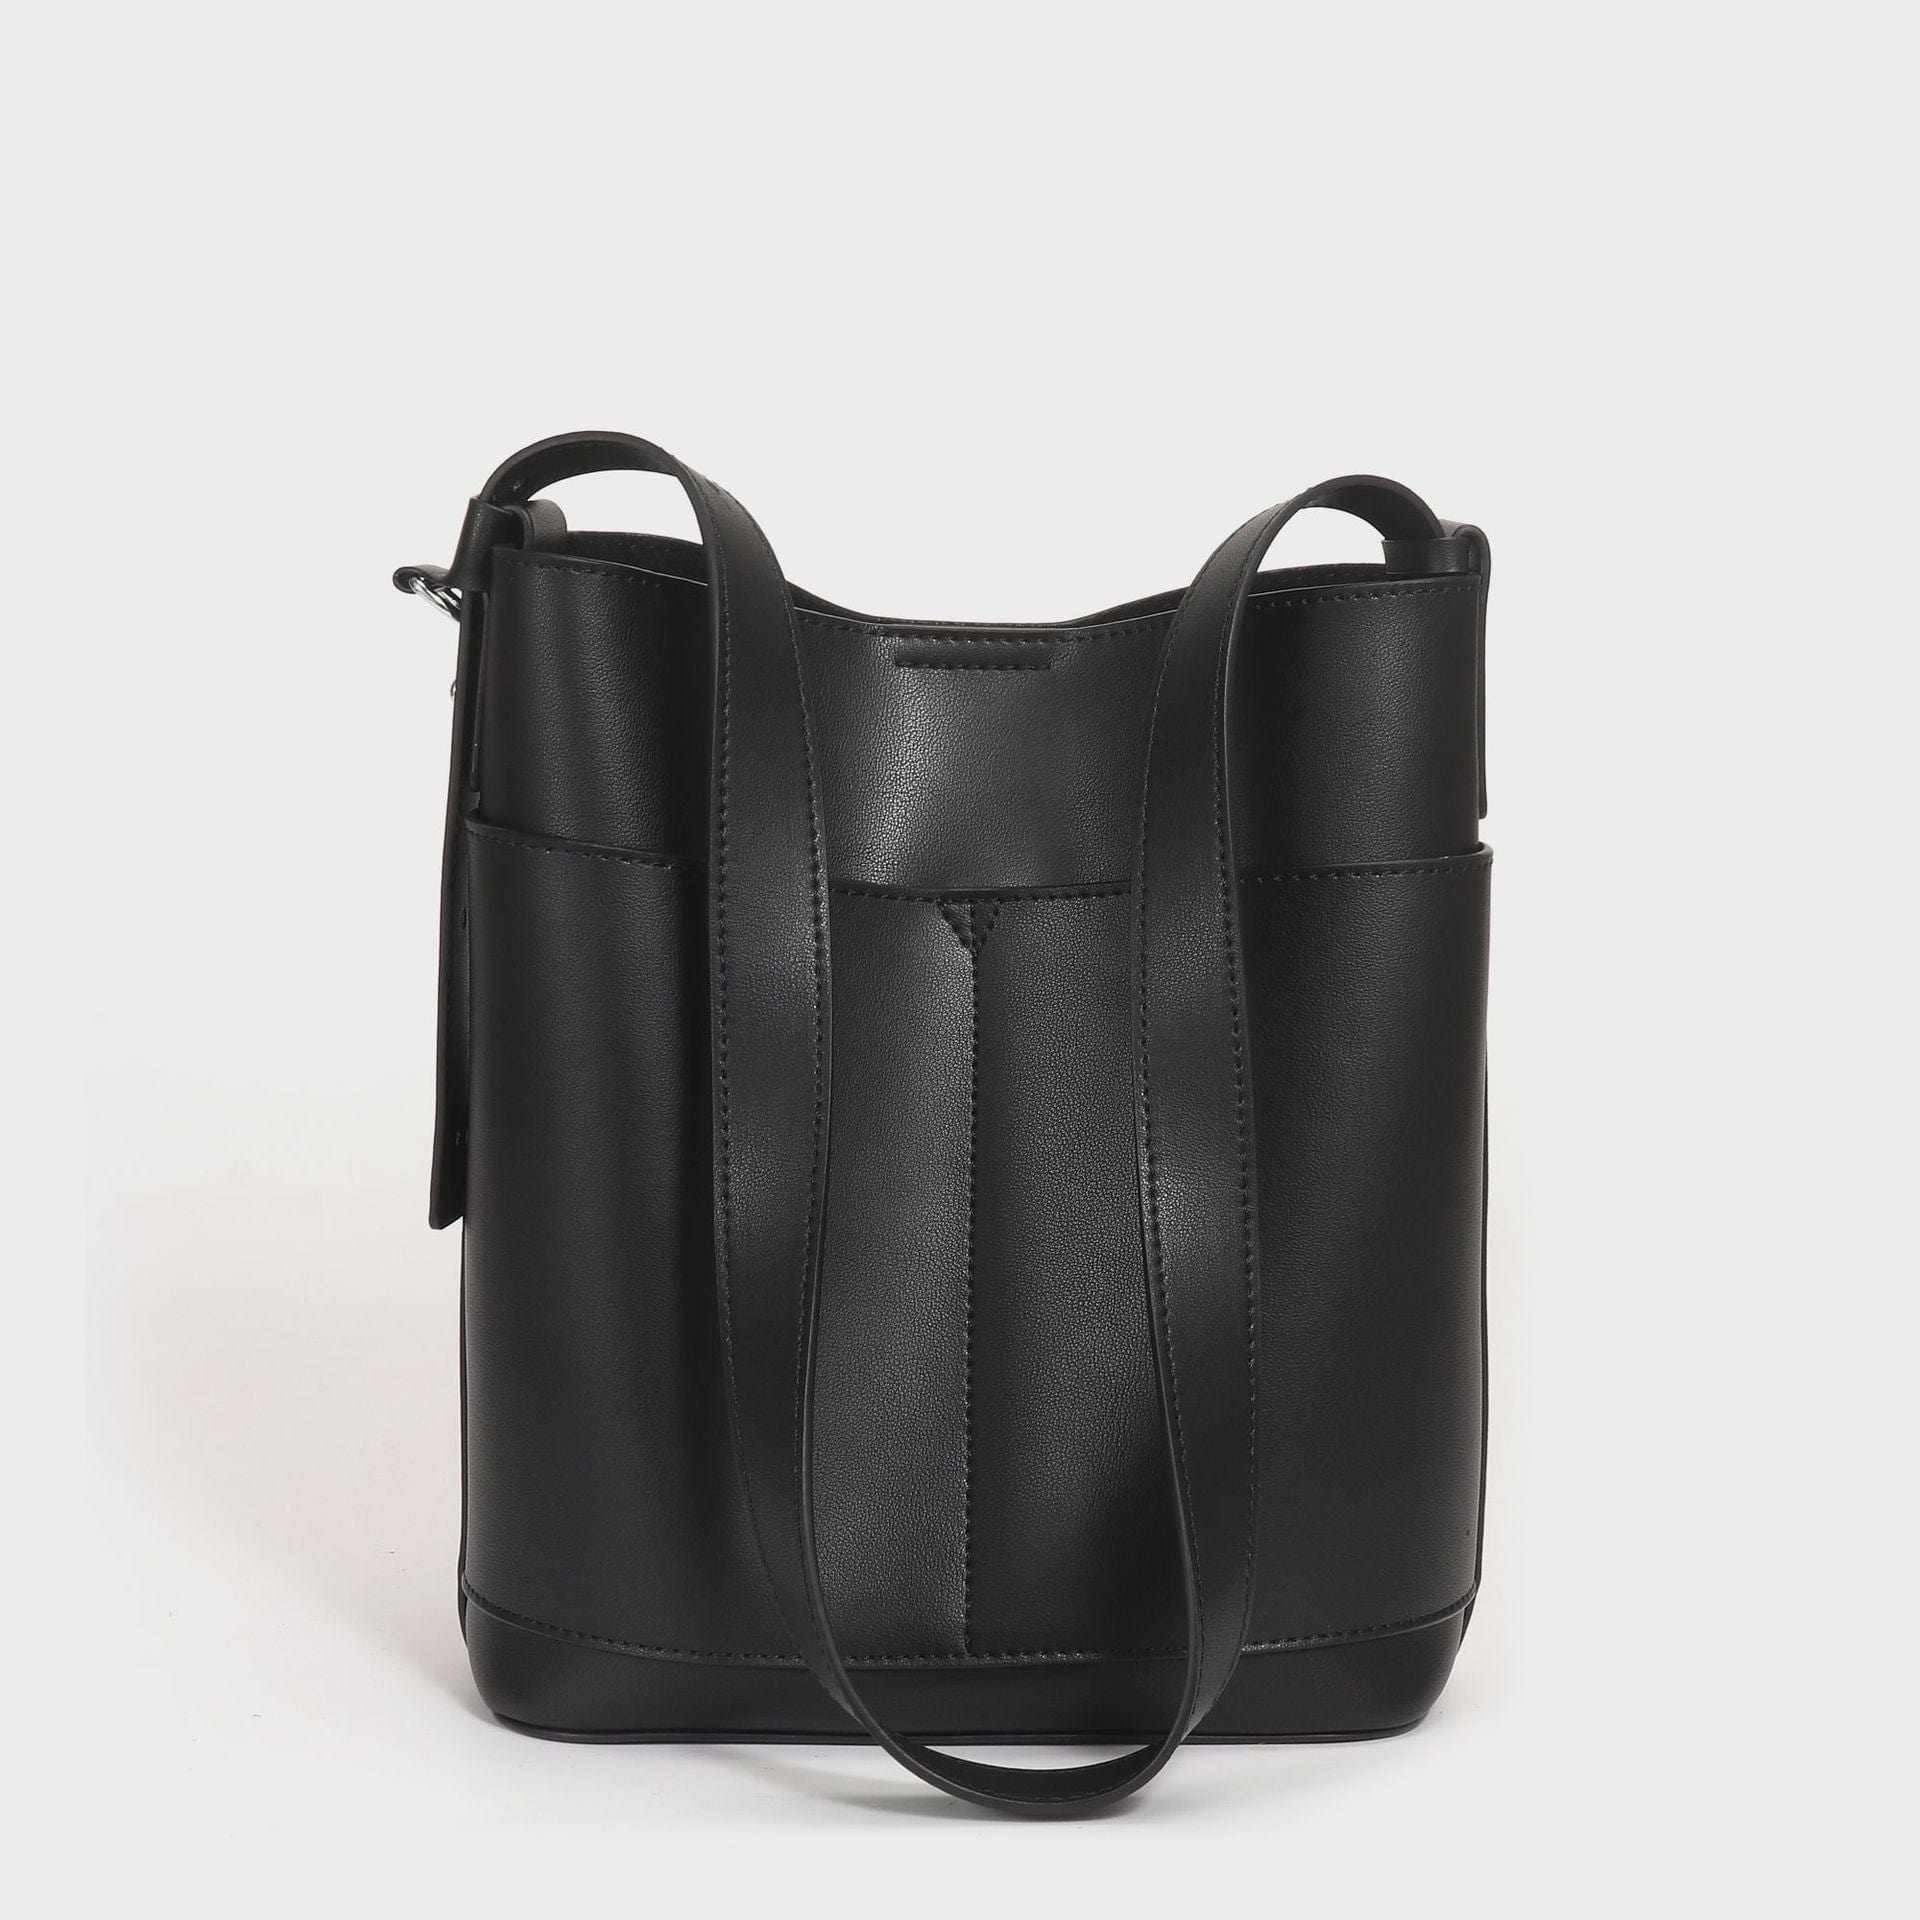 a black leather tote bag on a white background